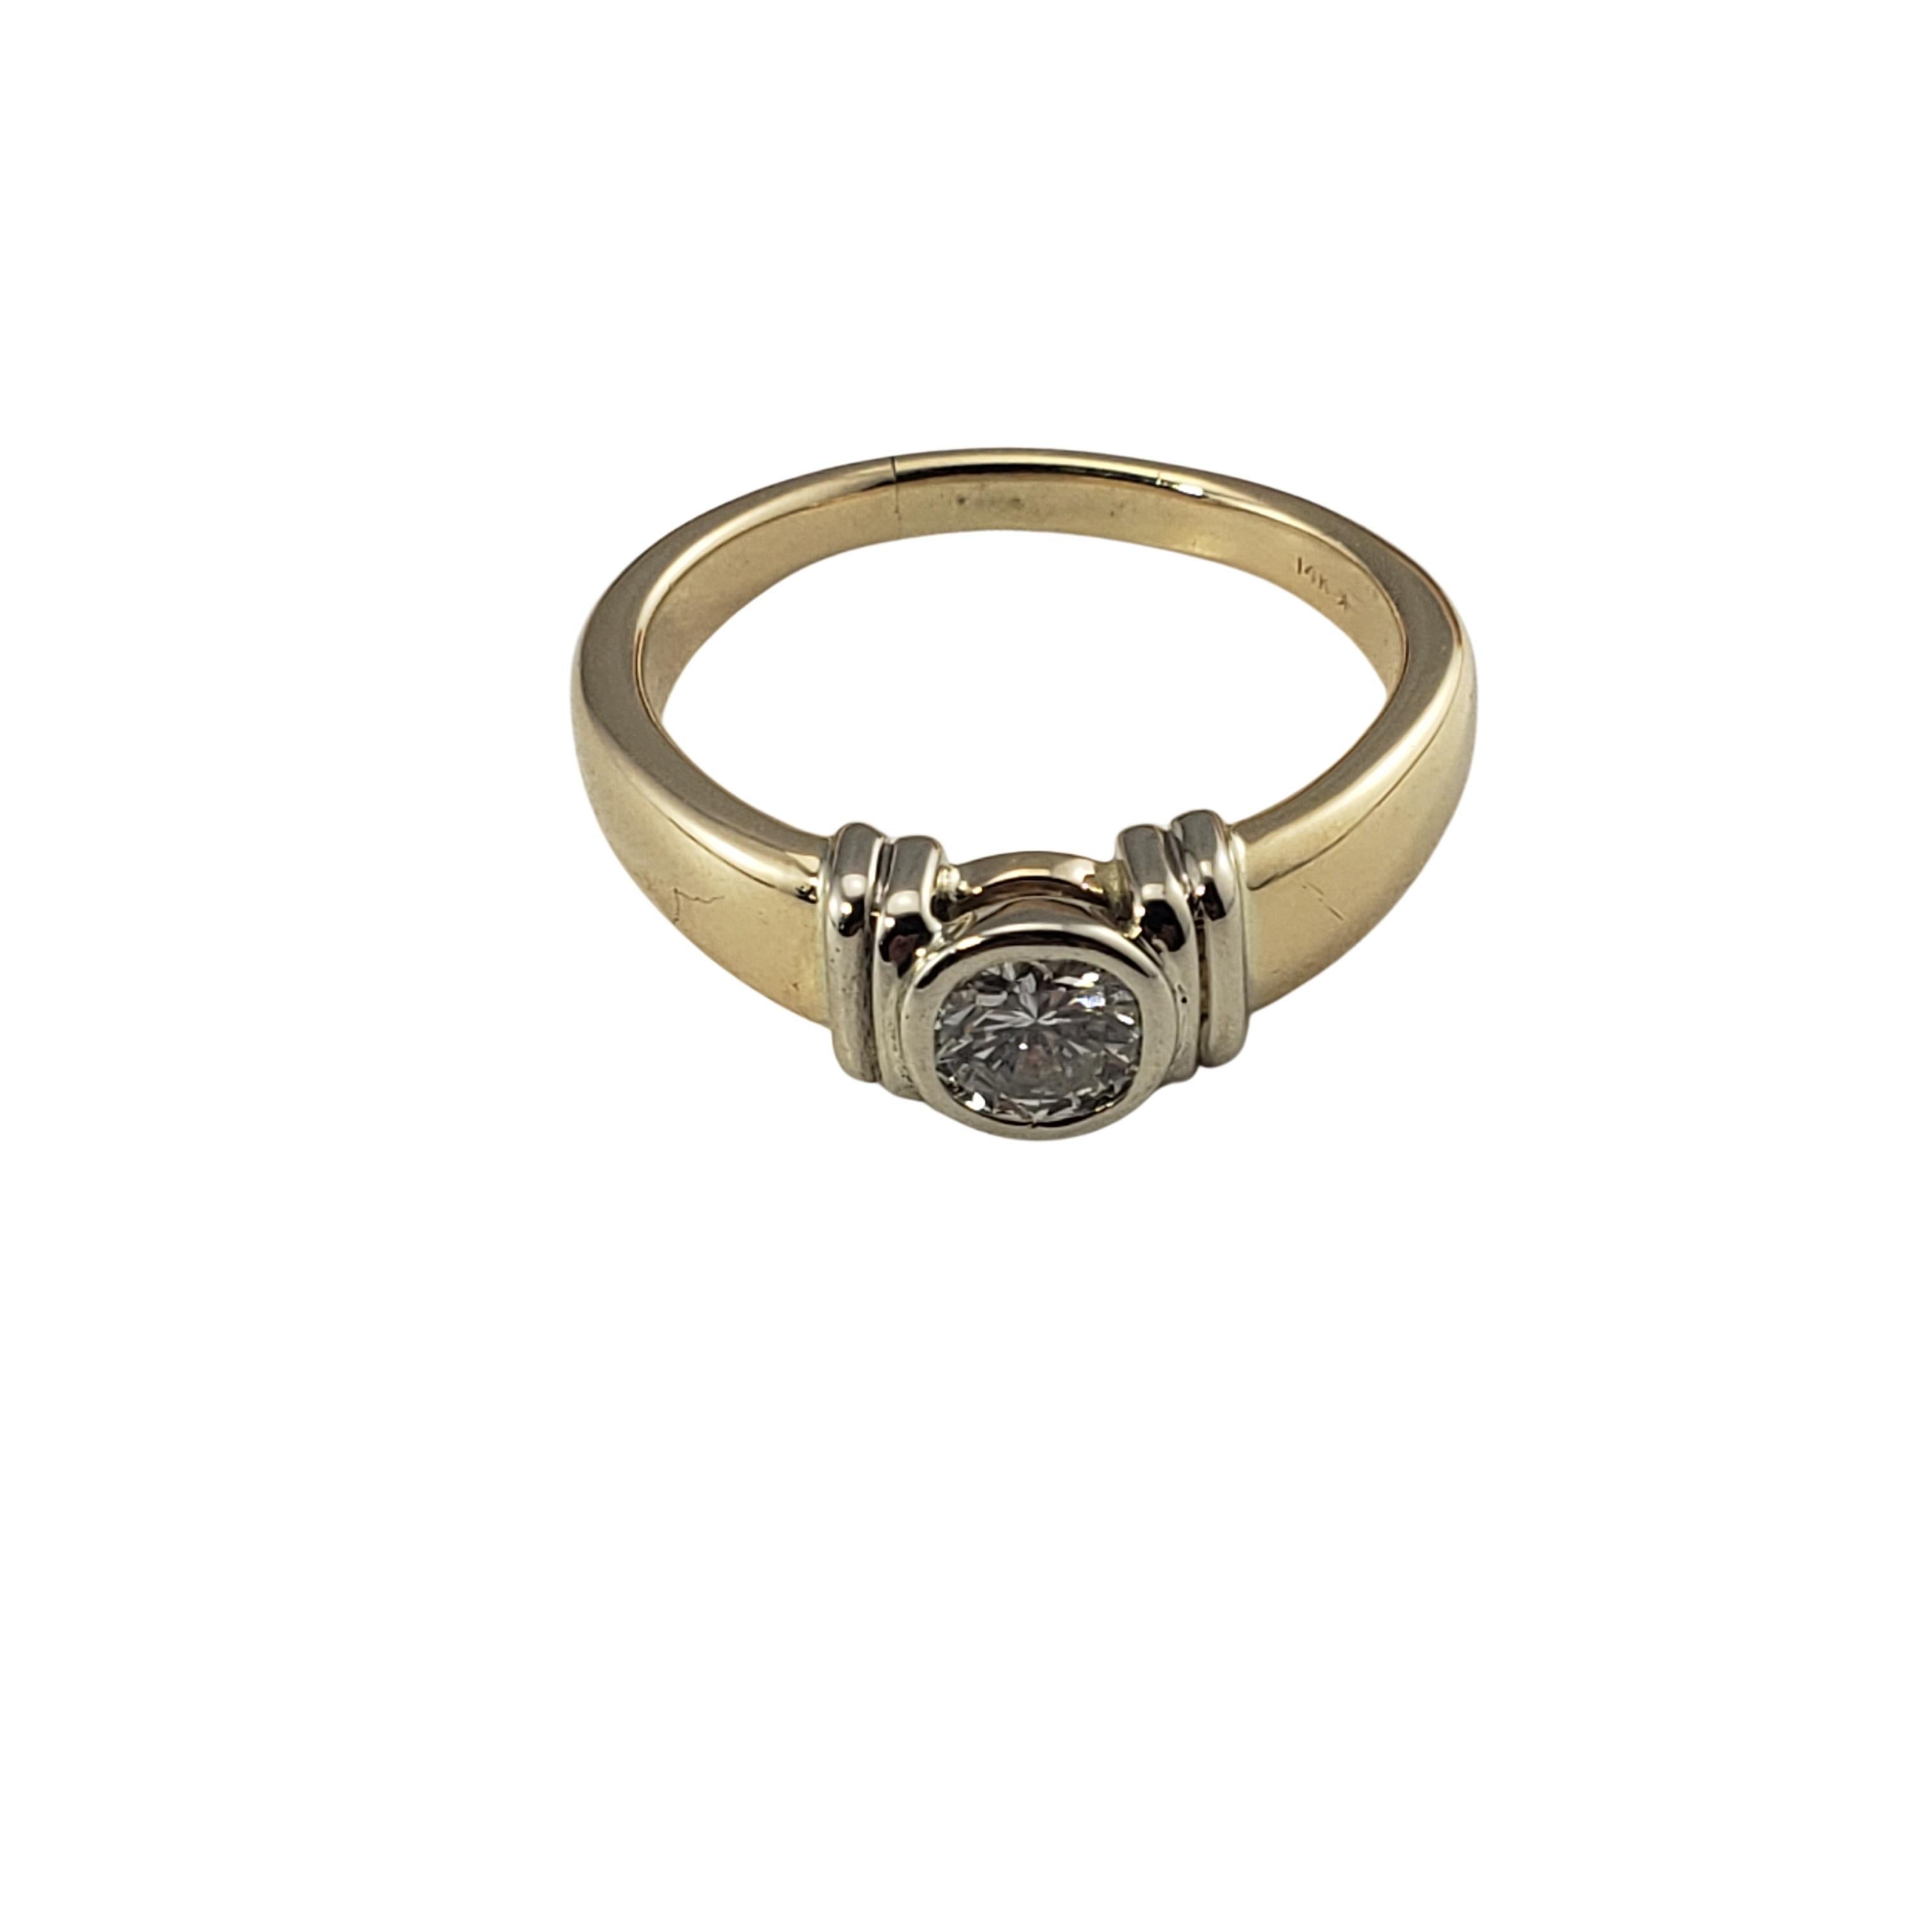 14 Karat Yellow Gold Diamond Engagement Ring Size 9.25-

This sparkling ring features one round brilliant cut diamond set in classic 14K yellow gold.  Shank:  2 mm.

Approximate total diamond weight:  .50 ct.

Diamond color:  H

Diamond clarity: 